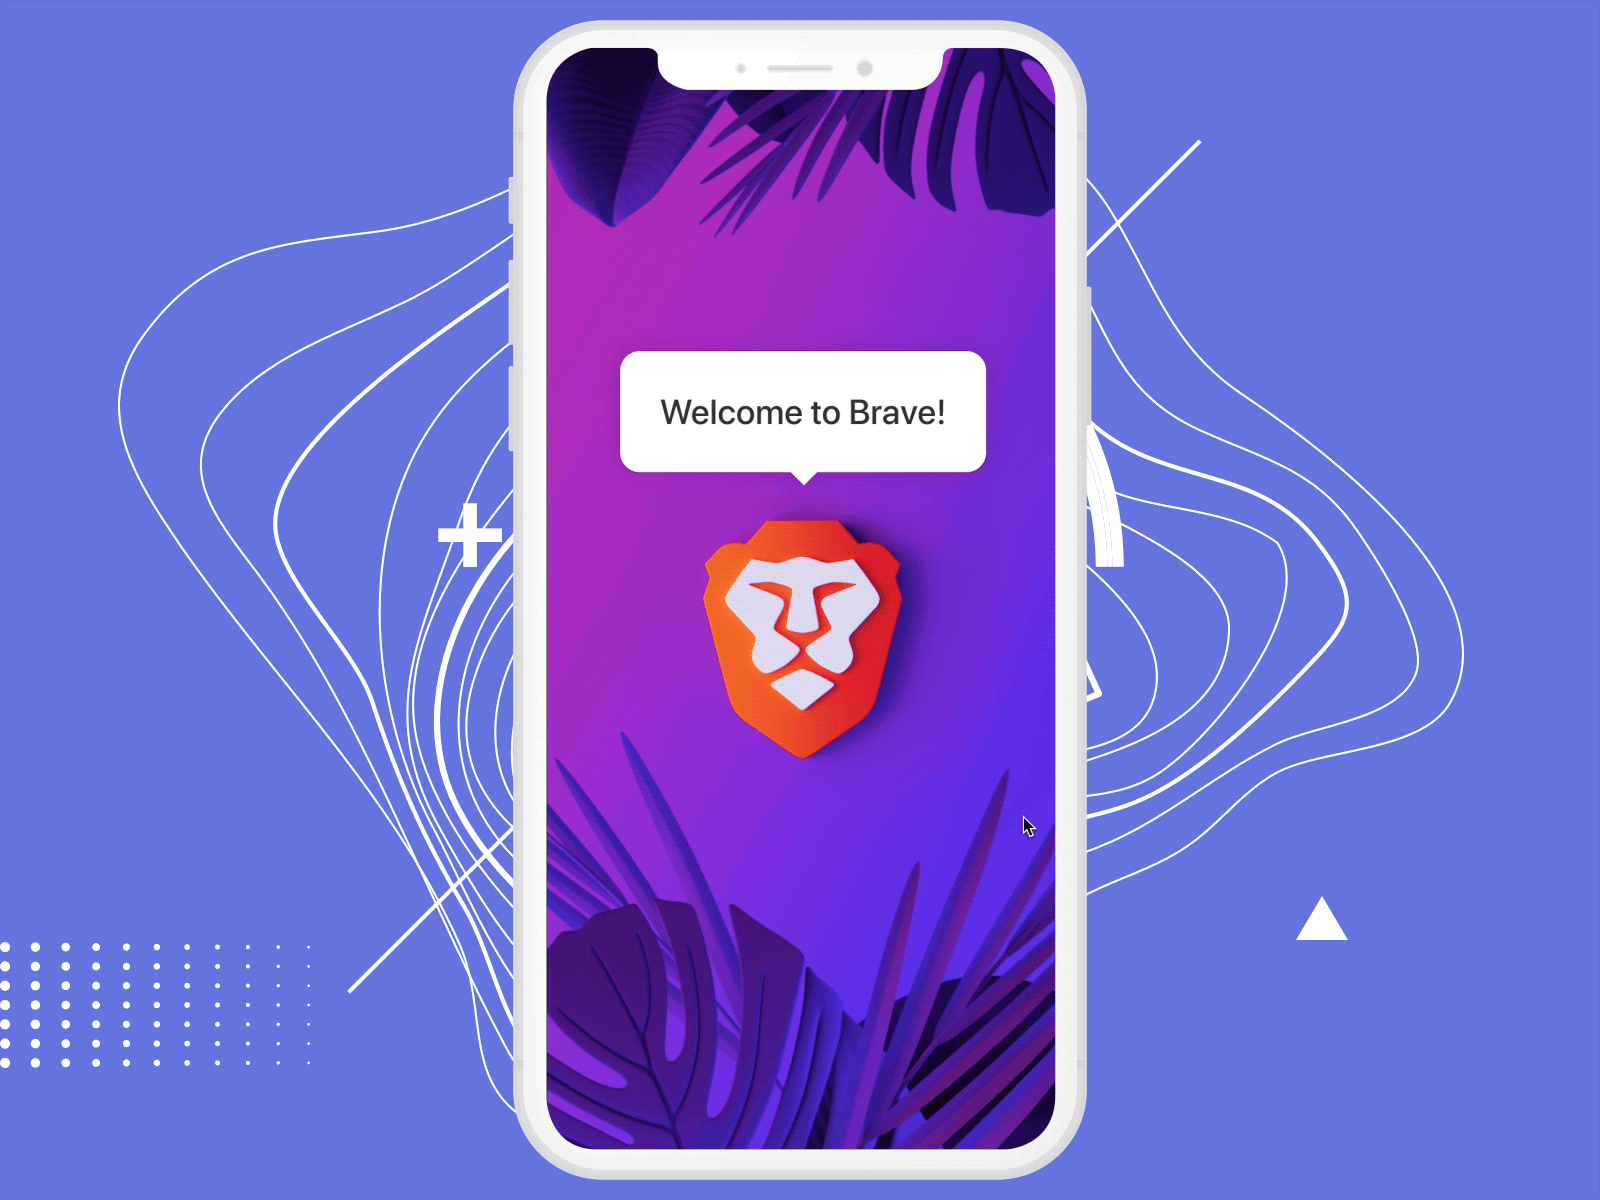 Brave Browser iOS onboarding r3 discovery figma ftux interaction design ios mobile onboarding product design prototype rapid prototyping retention ui design ux design welcome experience